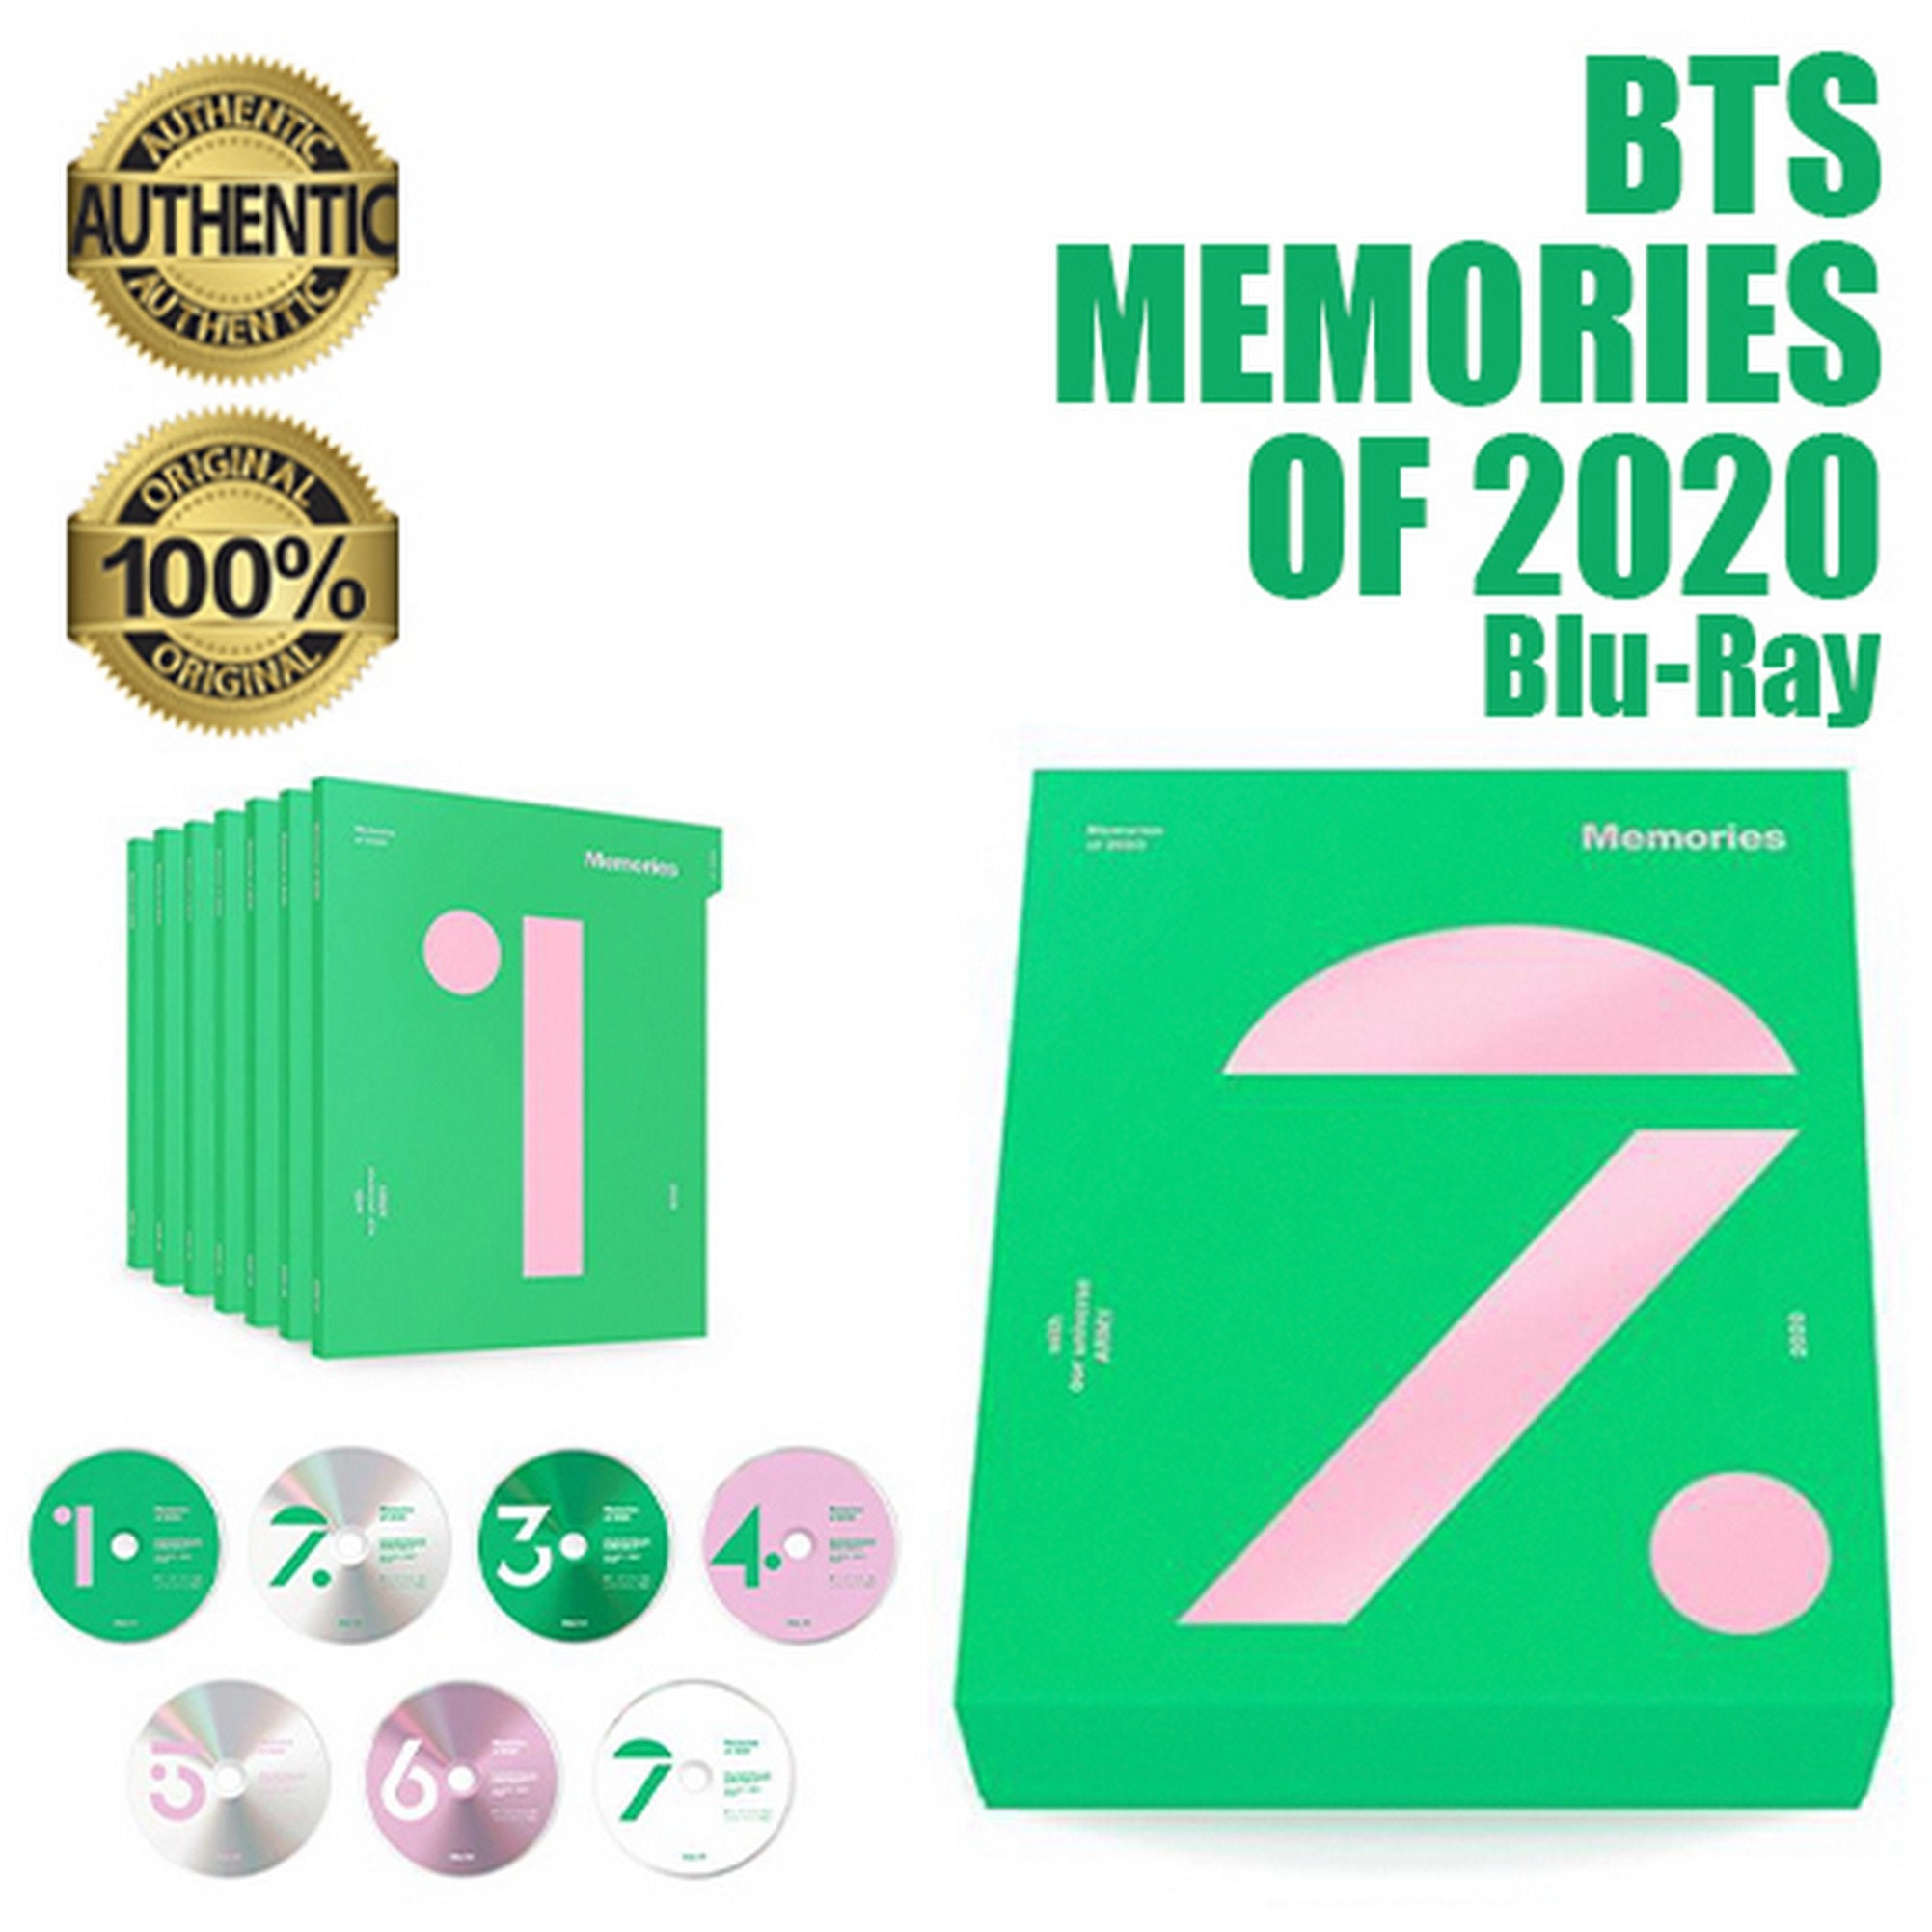 BTS Memories 2020 Blu Ray Full Set With Free Gifts - Etsy